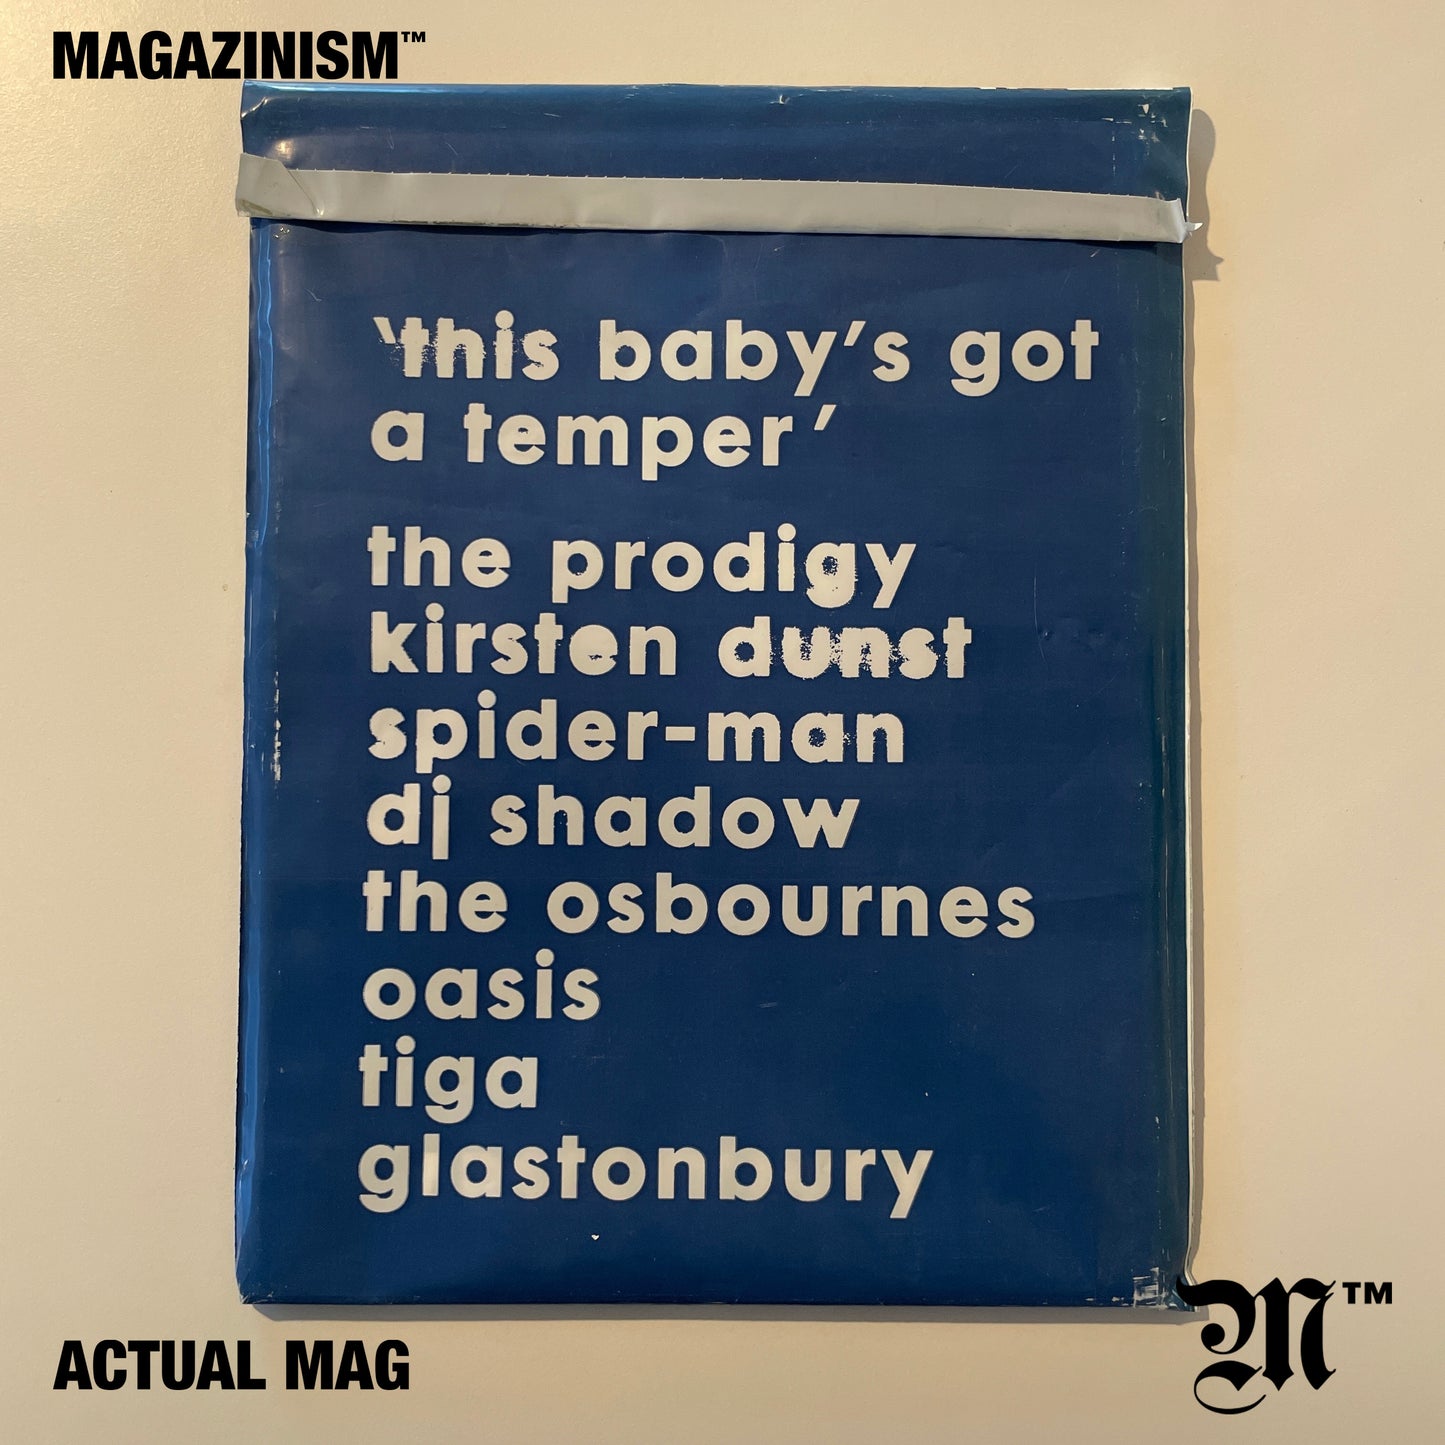 The Face No.65 - 2002 June - The Prodigy